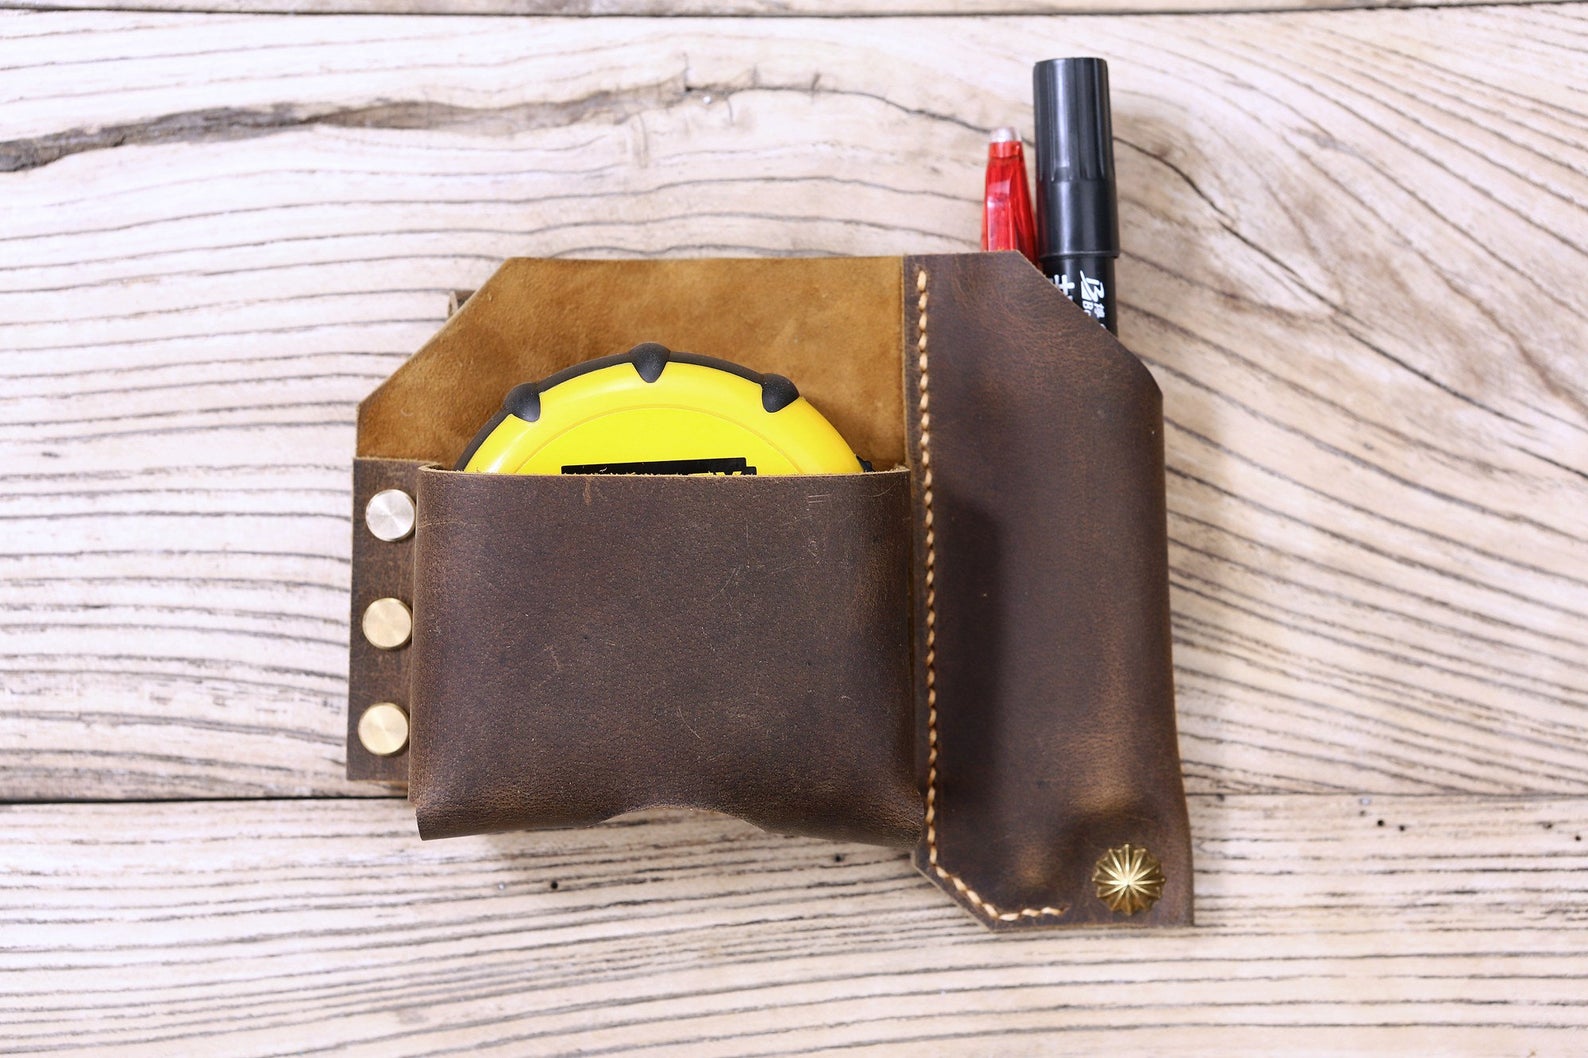 https://cdn.shopify.com/s/files/1/1794/7261/products/personalized-full-grain-leather-tape-measure-holder-pouch-686383.jpg?v=1696127667